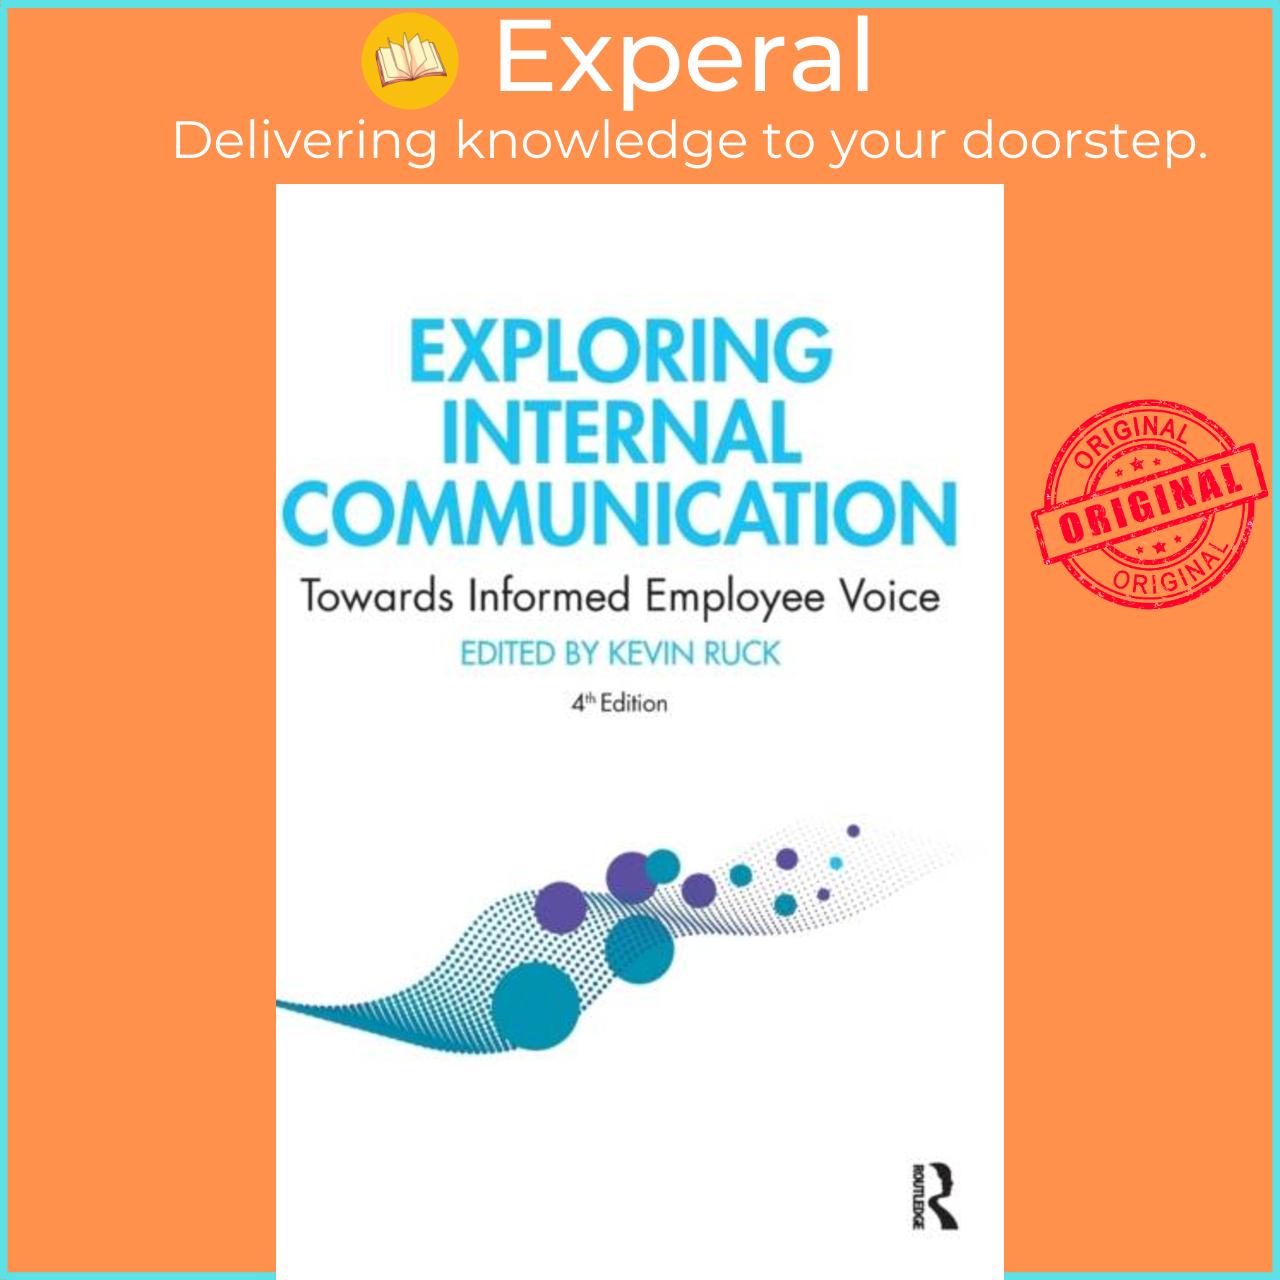 Sách - Exploring Internal Communication - Towards Informed Employee Voice by Kevin Ruck (UK edition, hardcover)